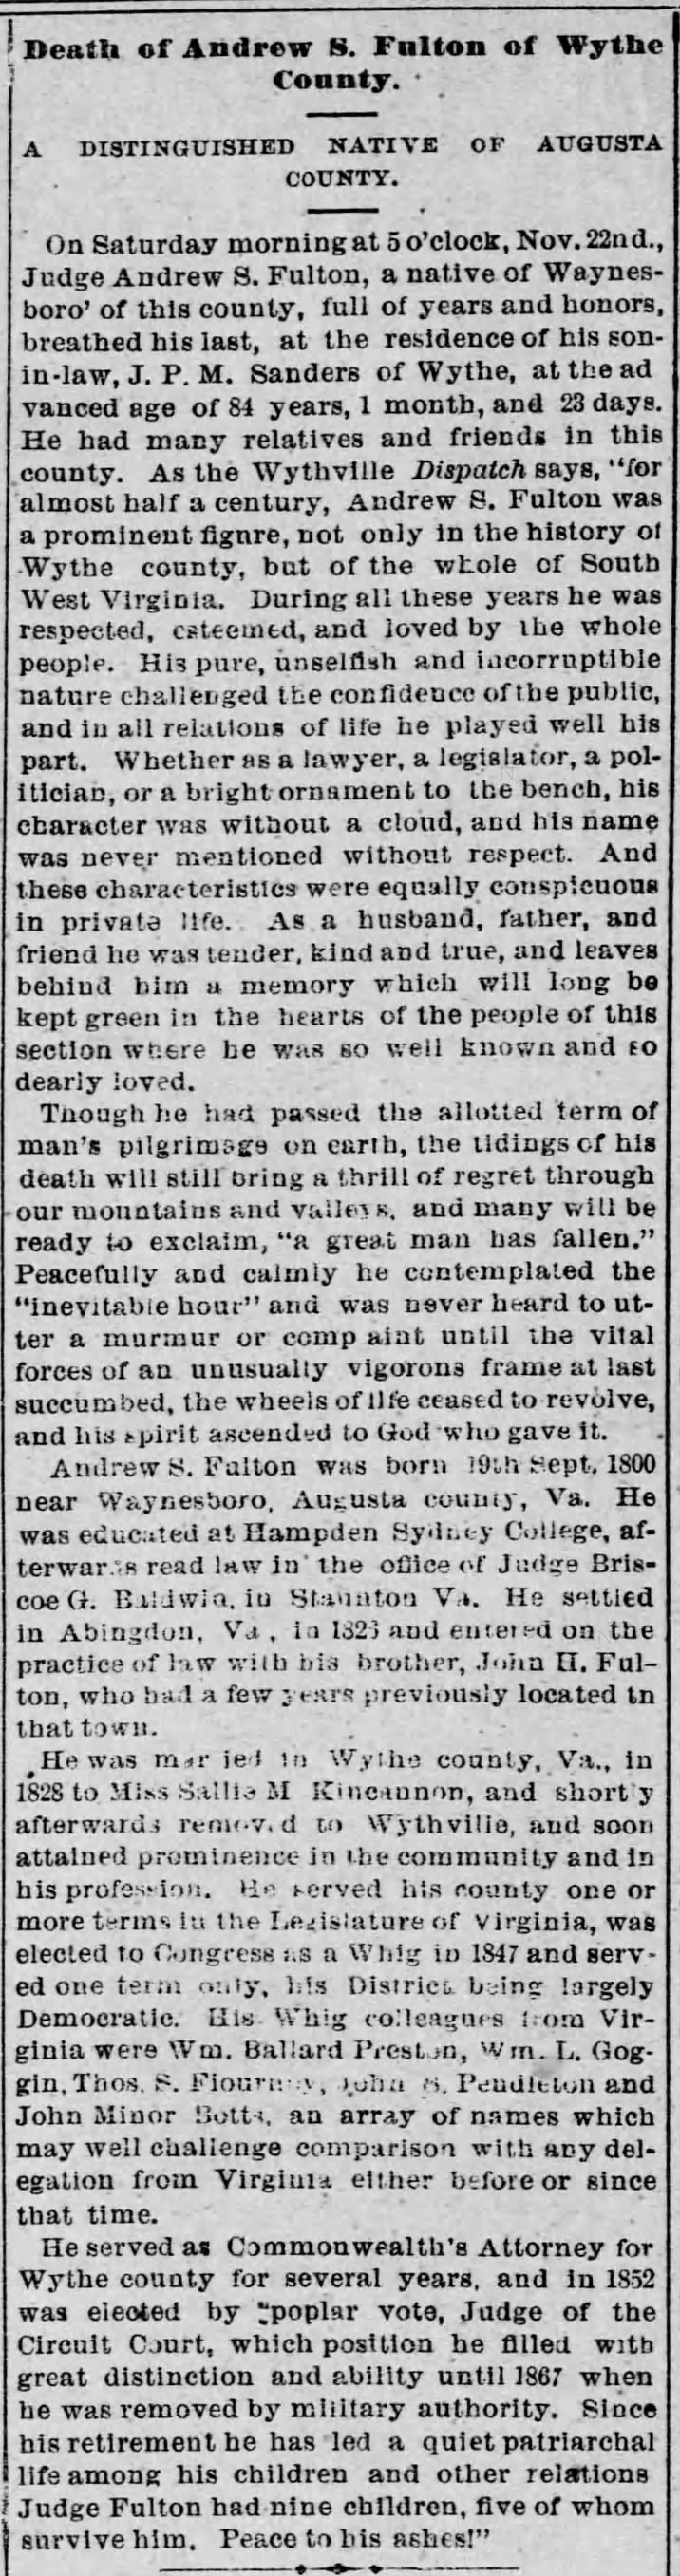 Death of Andrew S. Fulton of Wythe County; 3 Dec 1884; Staunton Spectator and General Advertiser; 3